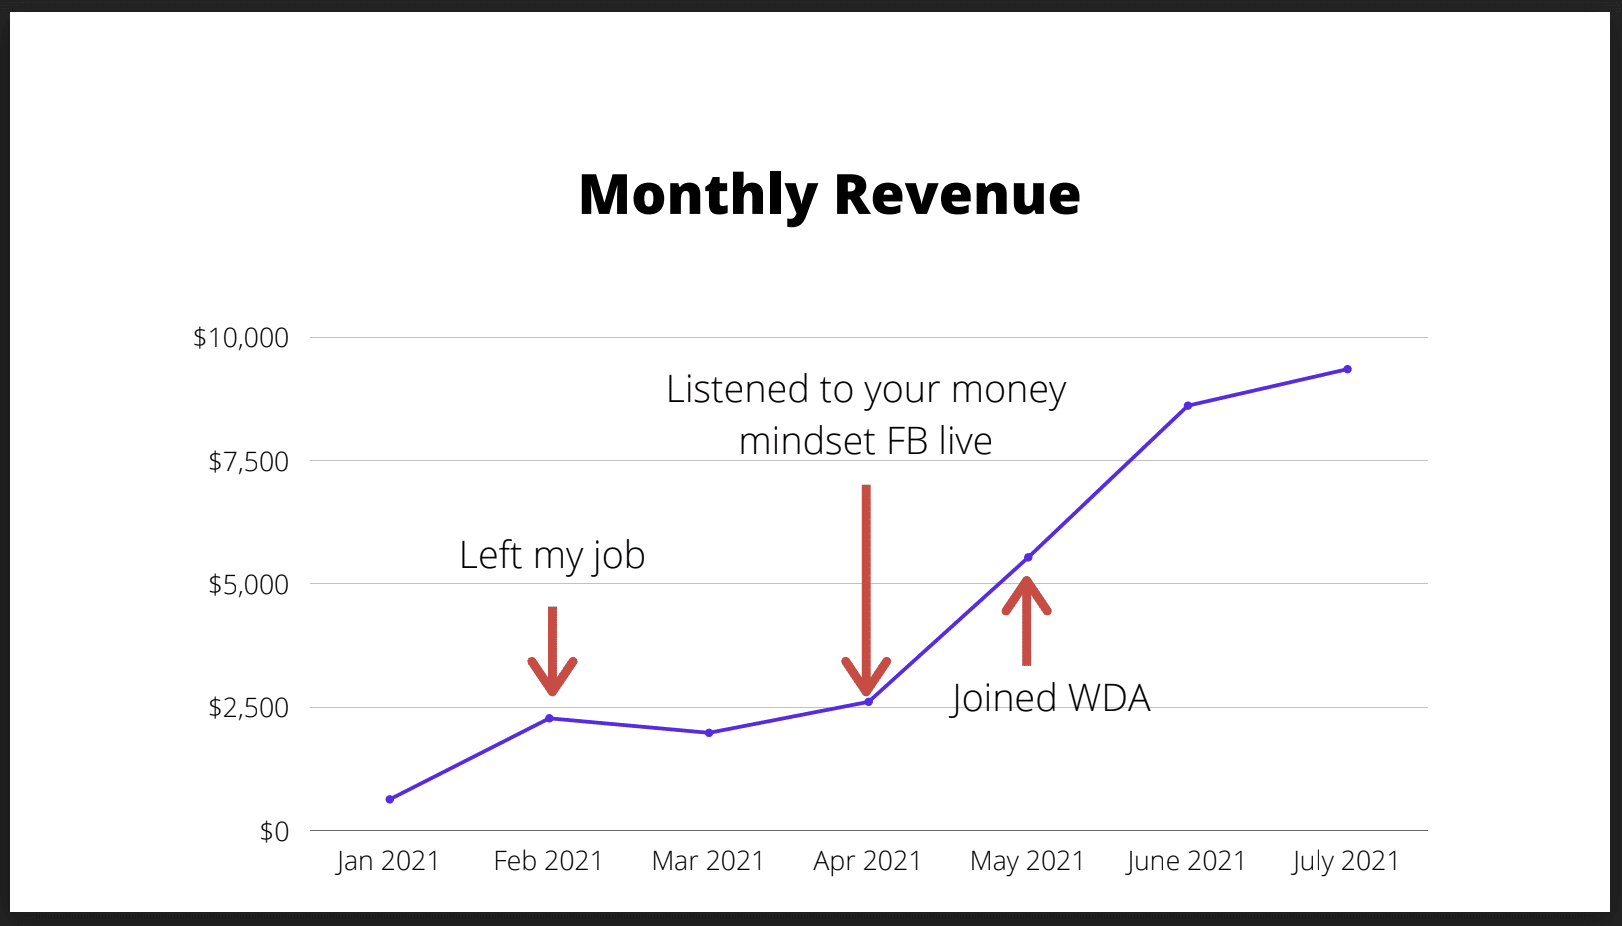 In this image, a timeline of the monthly revenue of an individual, starting from January 2021 to July 2021, increasing from $0 to $10,000. Full Text: Monthly Revenue $10,000 Listened to your money $7,500 mindset FB live Left my job $5,000 $2,500 Joined WDA $0 Jan 2021 Feb 2021 Mar 2021 Apr 2021 May 2021 June 2021 July 2021